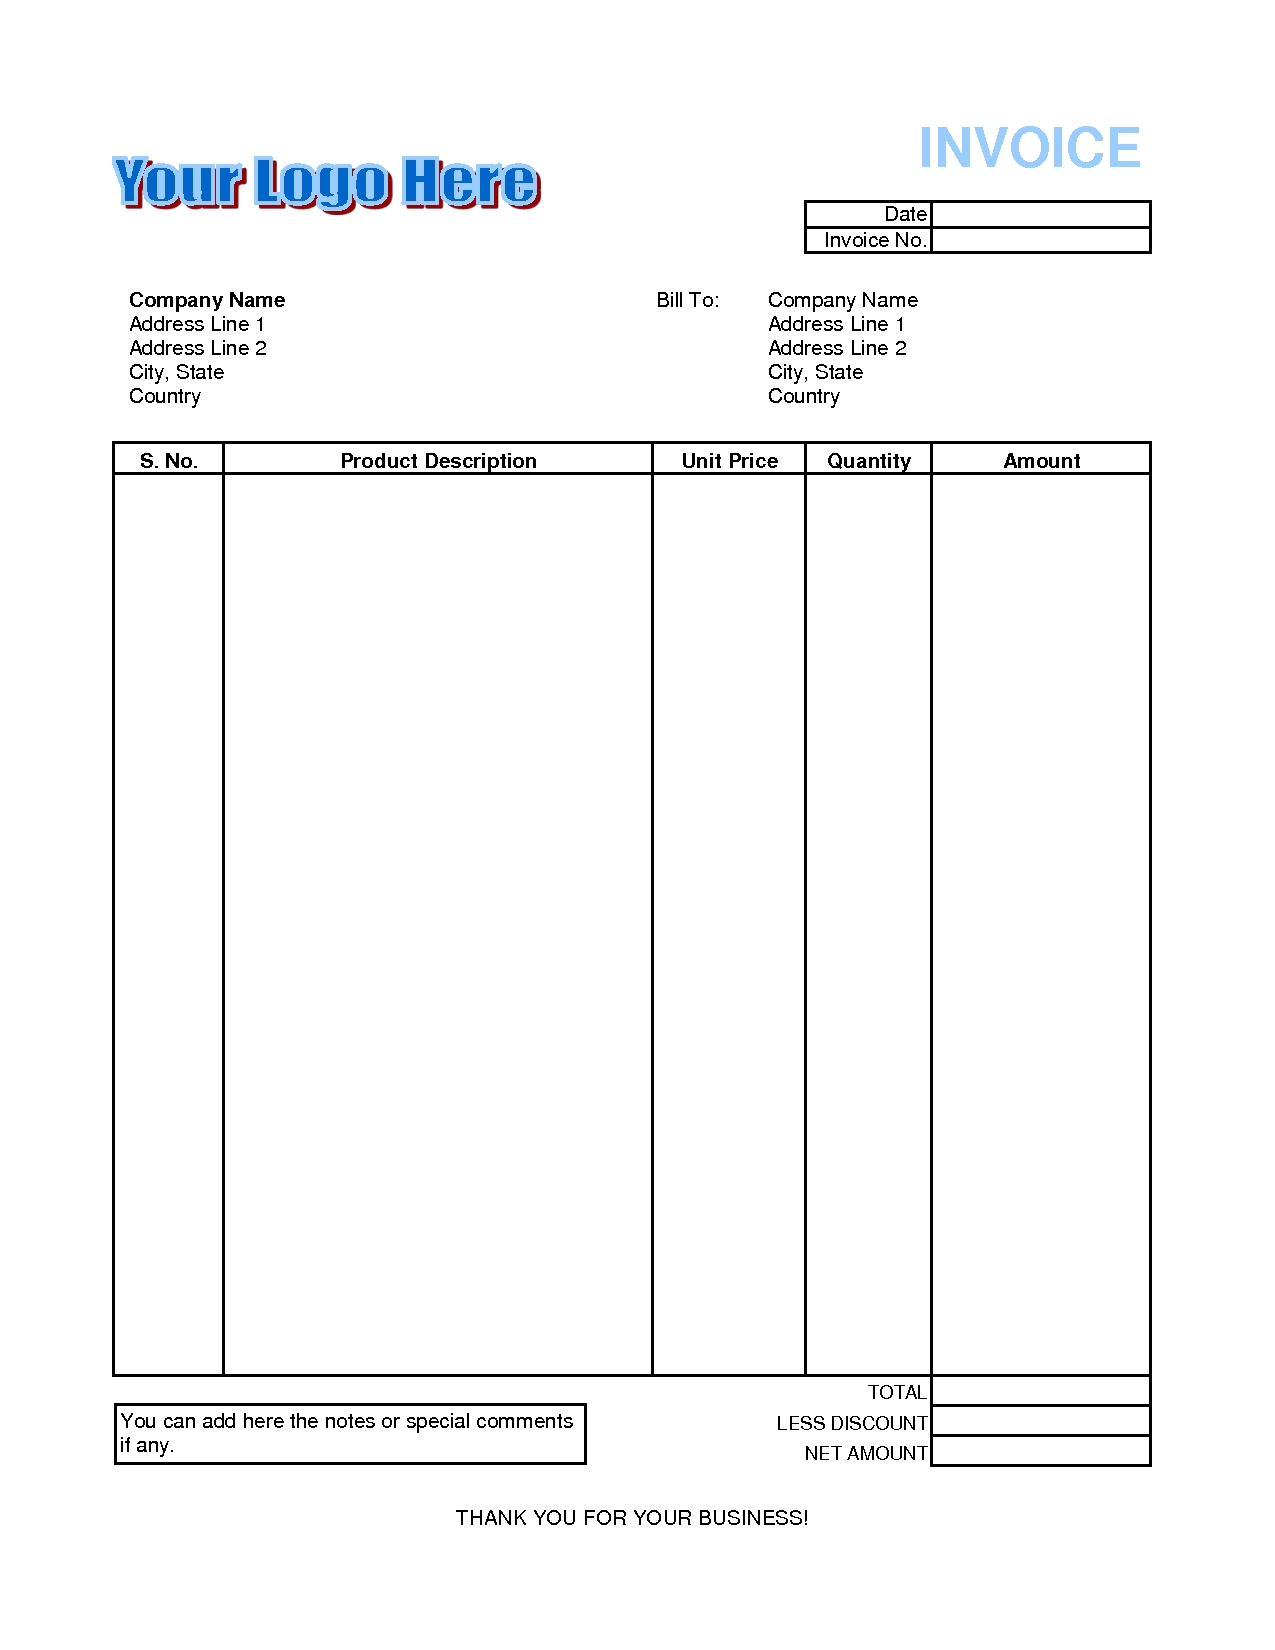 free invoice template excel excel billing invoice template invoice invoice template free excel